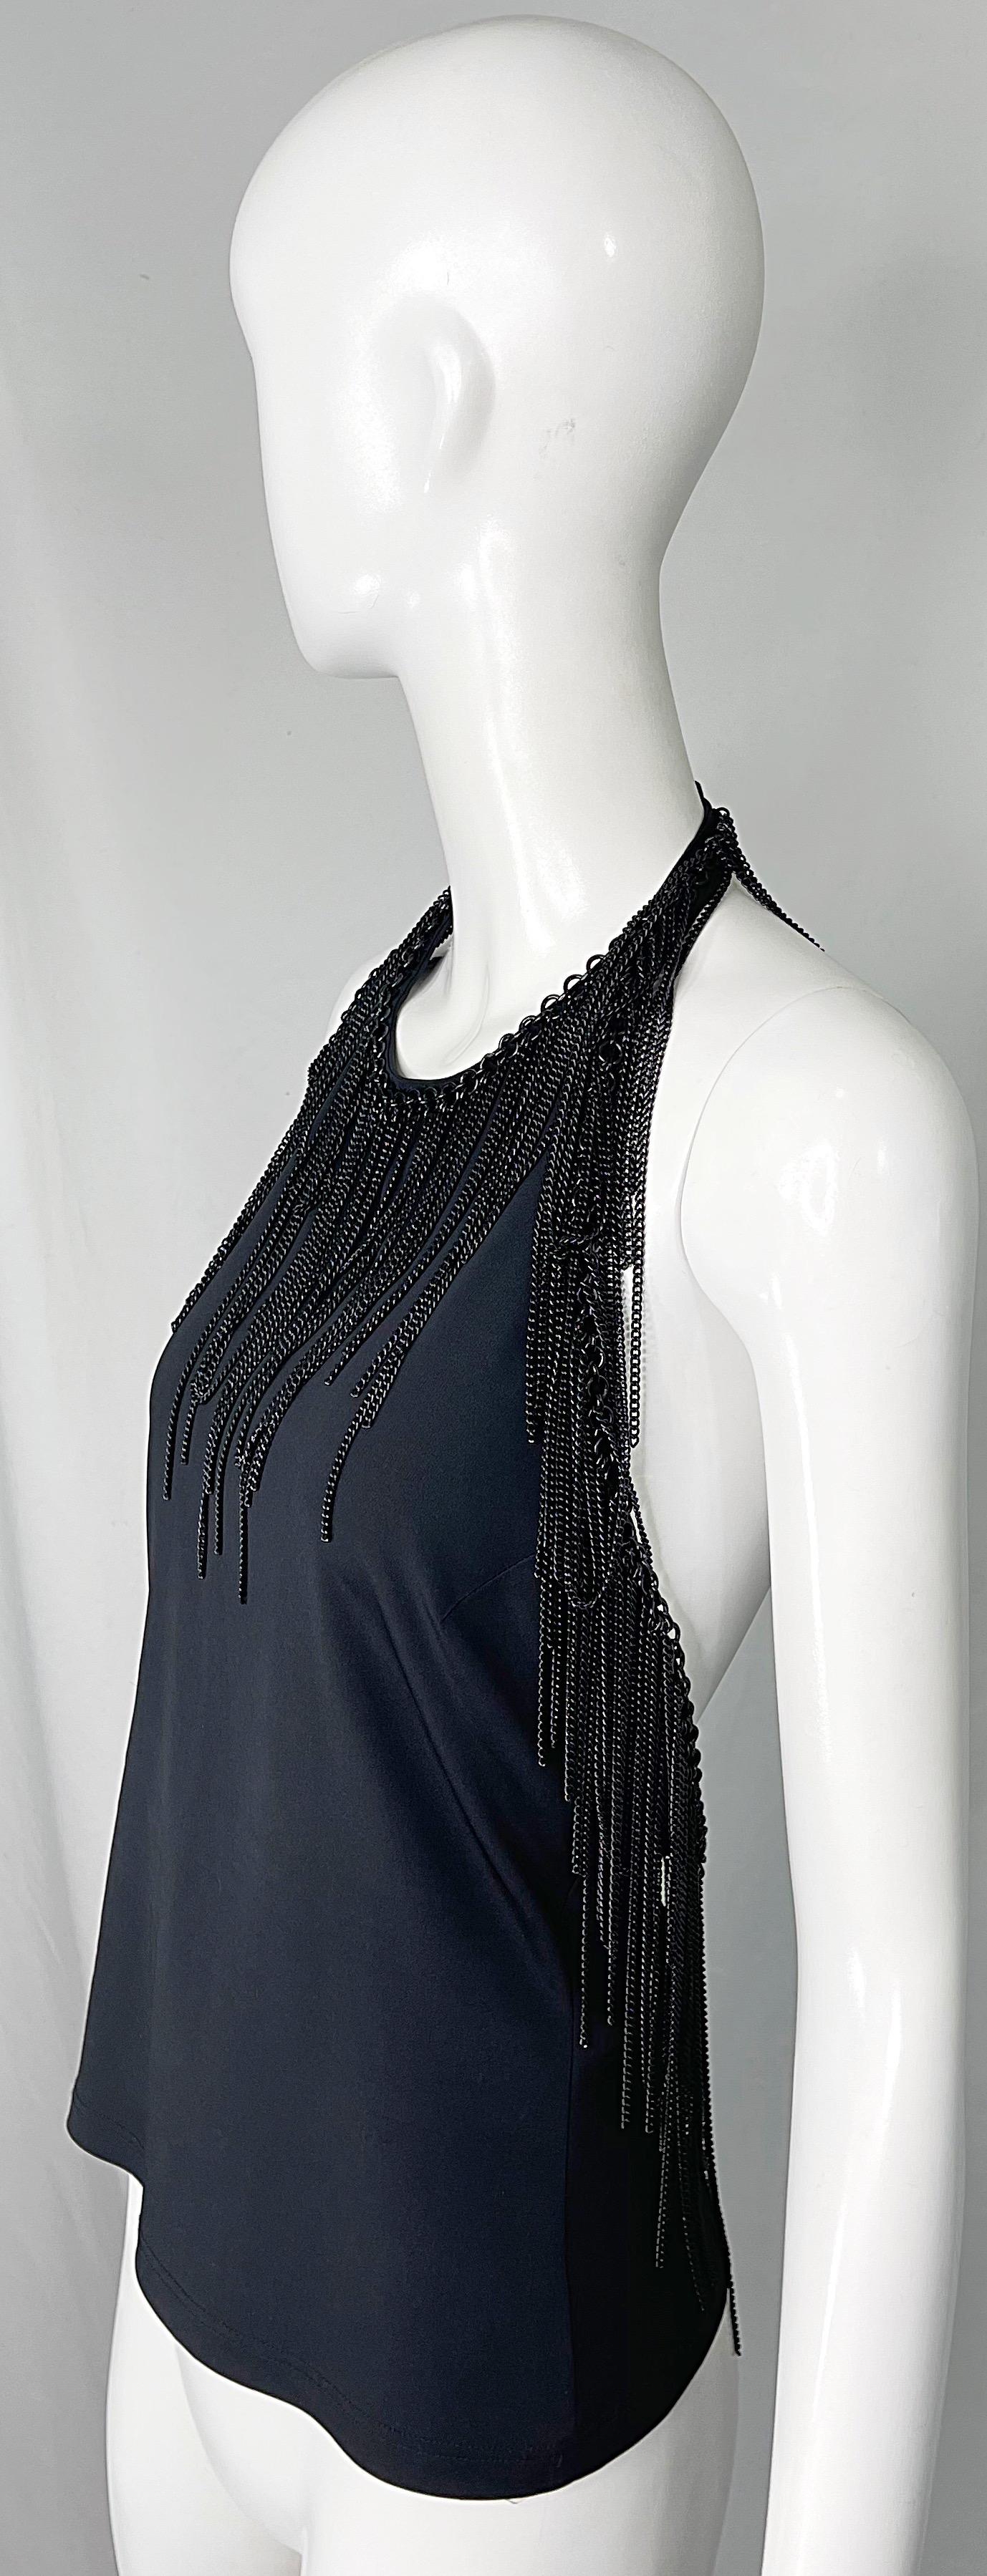 Gianni Versace 2000s Size 44 / 8 10 Black Chain Encrusted Y2K Halter Top Shirt  For Sale 6